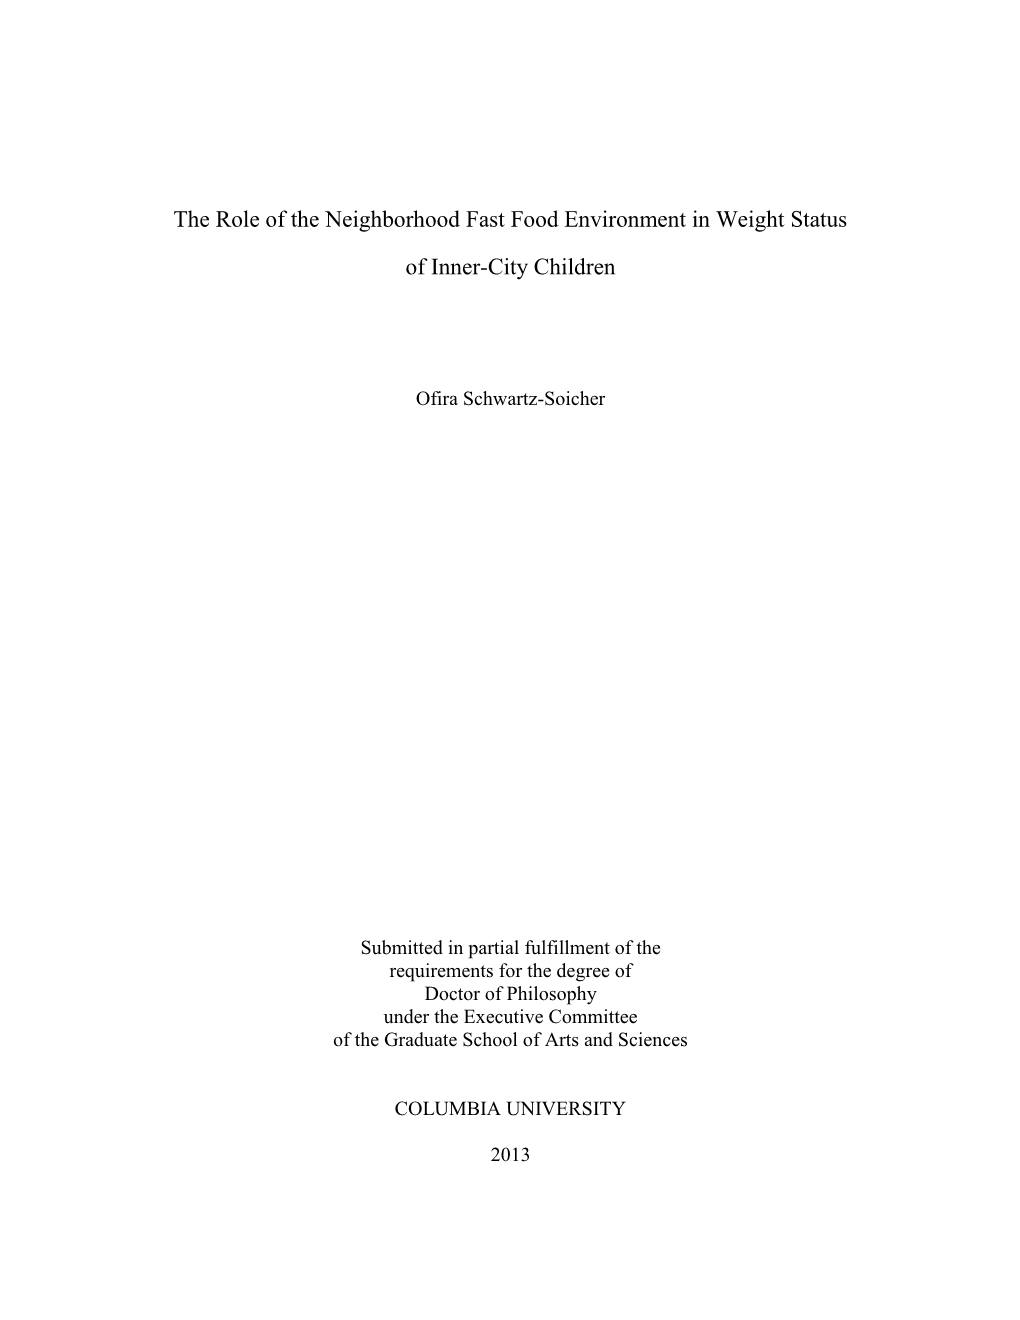 The Role of the Neighborhood Fast Food Environment in Weight Status